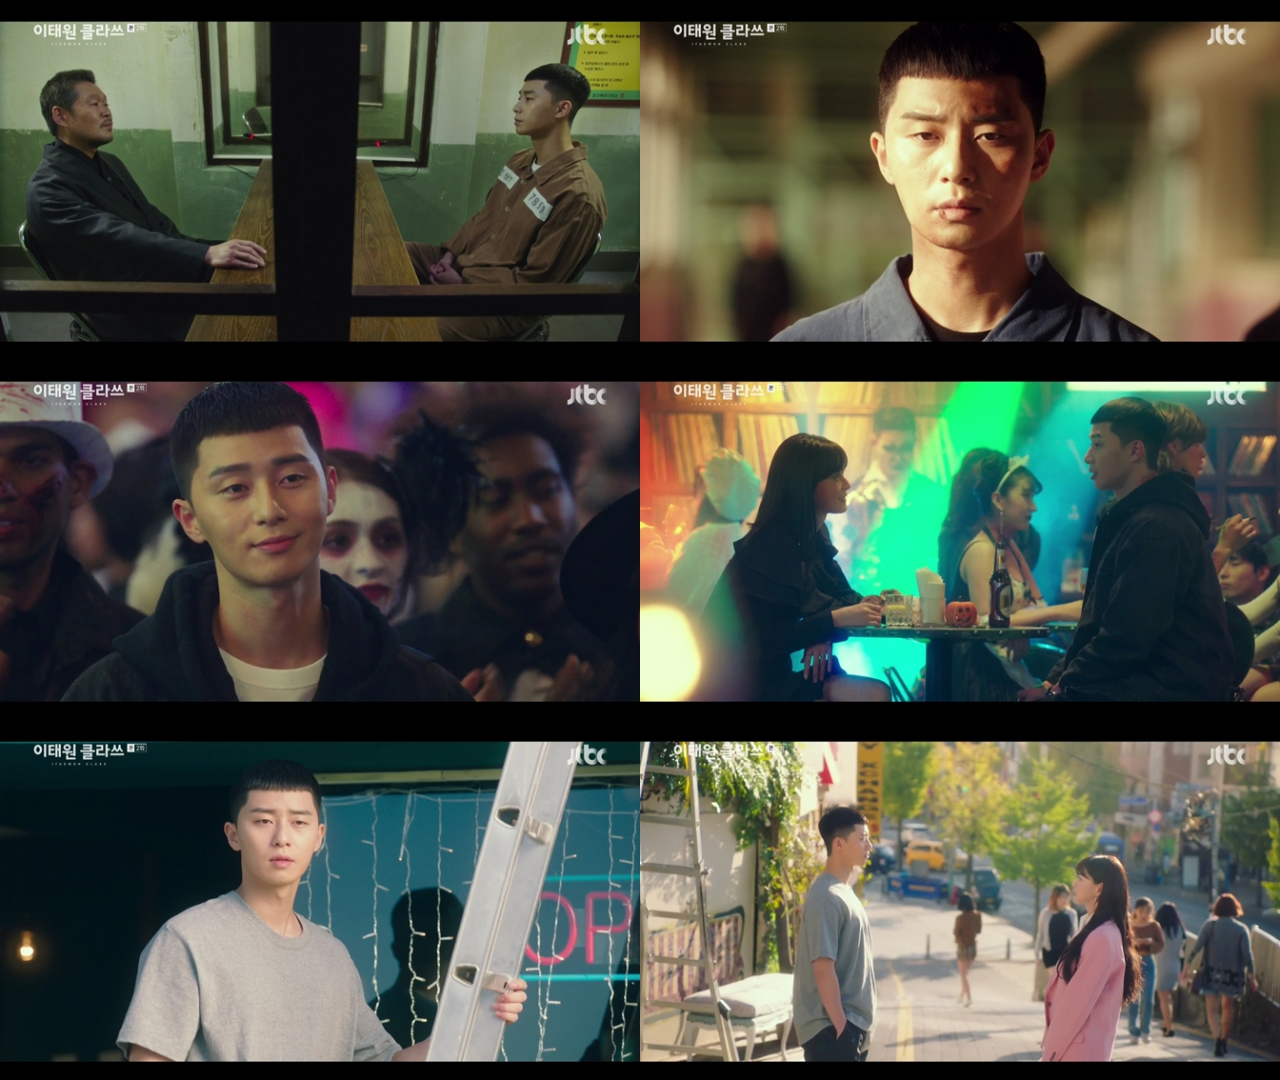 - Park Seo-joon, Furious King of the End of the Control of the EndPark Seo-joon shows hard-carrying ability and immerses viewersIn JTBCs Drama One Clath, Park Seo-joon is enhancing the immersion of the drama with delicate control of the emotional strength naturally.In the second episode broadcast on the last day, a picture of Park, who pours Furious into Jang Geun (Ahn Bo-hyun), who drove his father to death, was drawn.The unbearable Furious-obsessed Park, who was about to strike Jang Geun with a stone, wailing, letting go of the strings of reason, was saddened by the detectives who had been reported and Oh Soo-ah (Kwon Na-ra) who had been stopped and put into prison for attempted murder.It also has a tense confrontation with Chairman Jang (Yoo Jae-myung), who came to the meeting to give him an opportunity, and inspires extreme tension.In addition, after he was released from prison, he planned revenge for Jangga and added interest to his new dream.Roy, who is headed to Itae, where Oh Soo-ah lives, has made a willingness to open a store here seven years later, against the Halloween landscape, and eventually showed a sense of accomplishment by opening a salmon night.Especially, for the first love Oh Soo-ah who met again, he showed a friendly tone and eyes, stimulated the excitement and made the hearts of viewers fluctuate.Park Seo-joon showed his luxury acting ability that he could not miss for a moment by drawing his irresistible feelings such as longing and sadness for his father and Furious for Jangga.Also, when he created a friendly atmosphere with Oh Soo-ah, he showed off the aspect of Loco artisan with a sweet energy.Park Seo-joon, who has flexibly filled the emotional line of the character with the temperature difference Acting that crosses the cold and warmth, once again proves his true value and expects his future activities.On the other hand, the ratings of the second episode of One Clath in Italy rose by 5.3% (based on Nielsen Korea, nationwide and paid households), which has gained a enthusiastic response by creating a new box office in the gilt drama world.One Clath is broadcast every Friday and Saturday at 10:50 p.m.